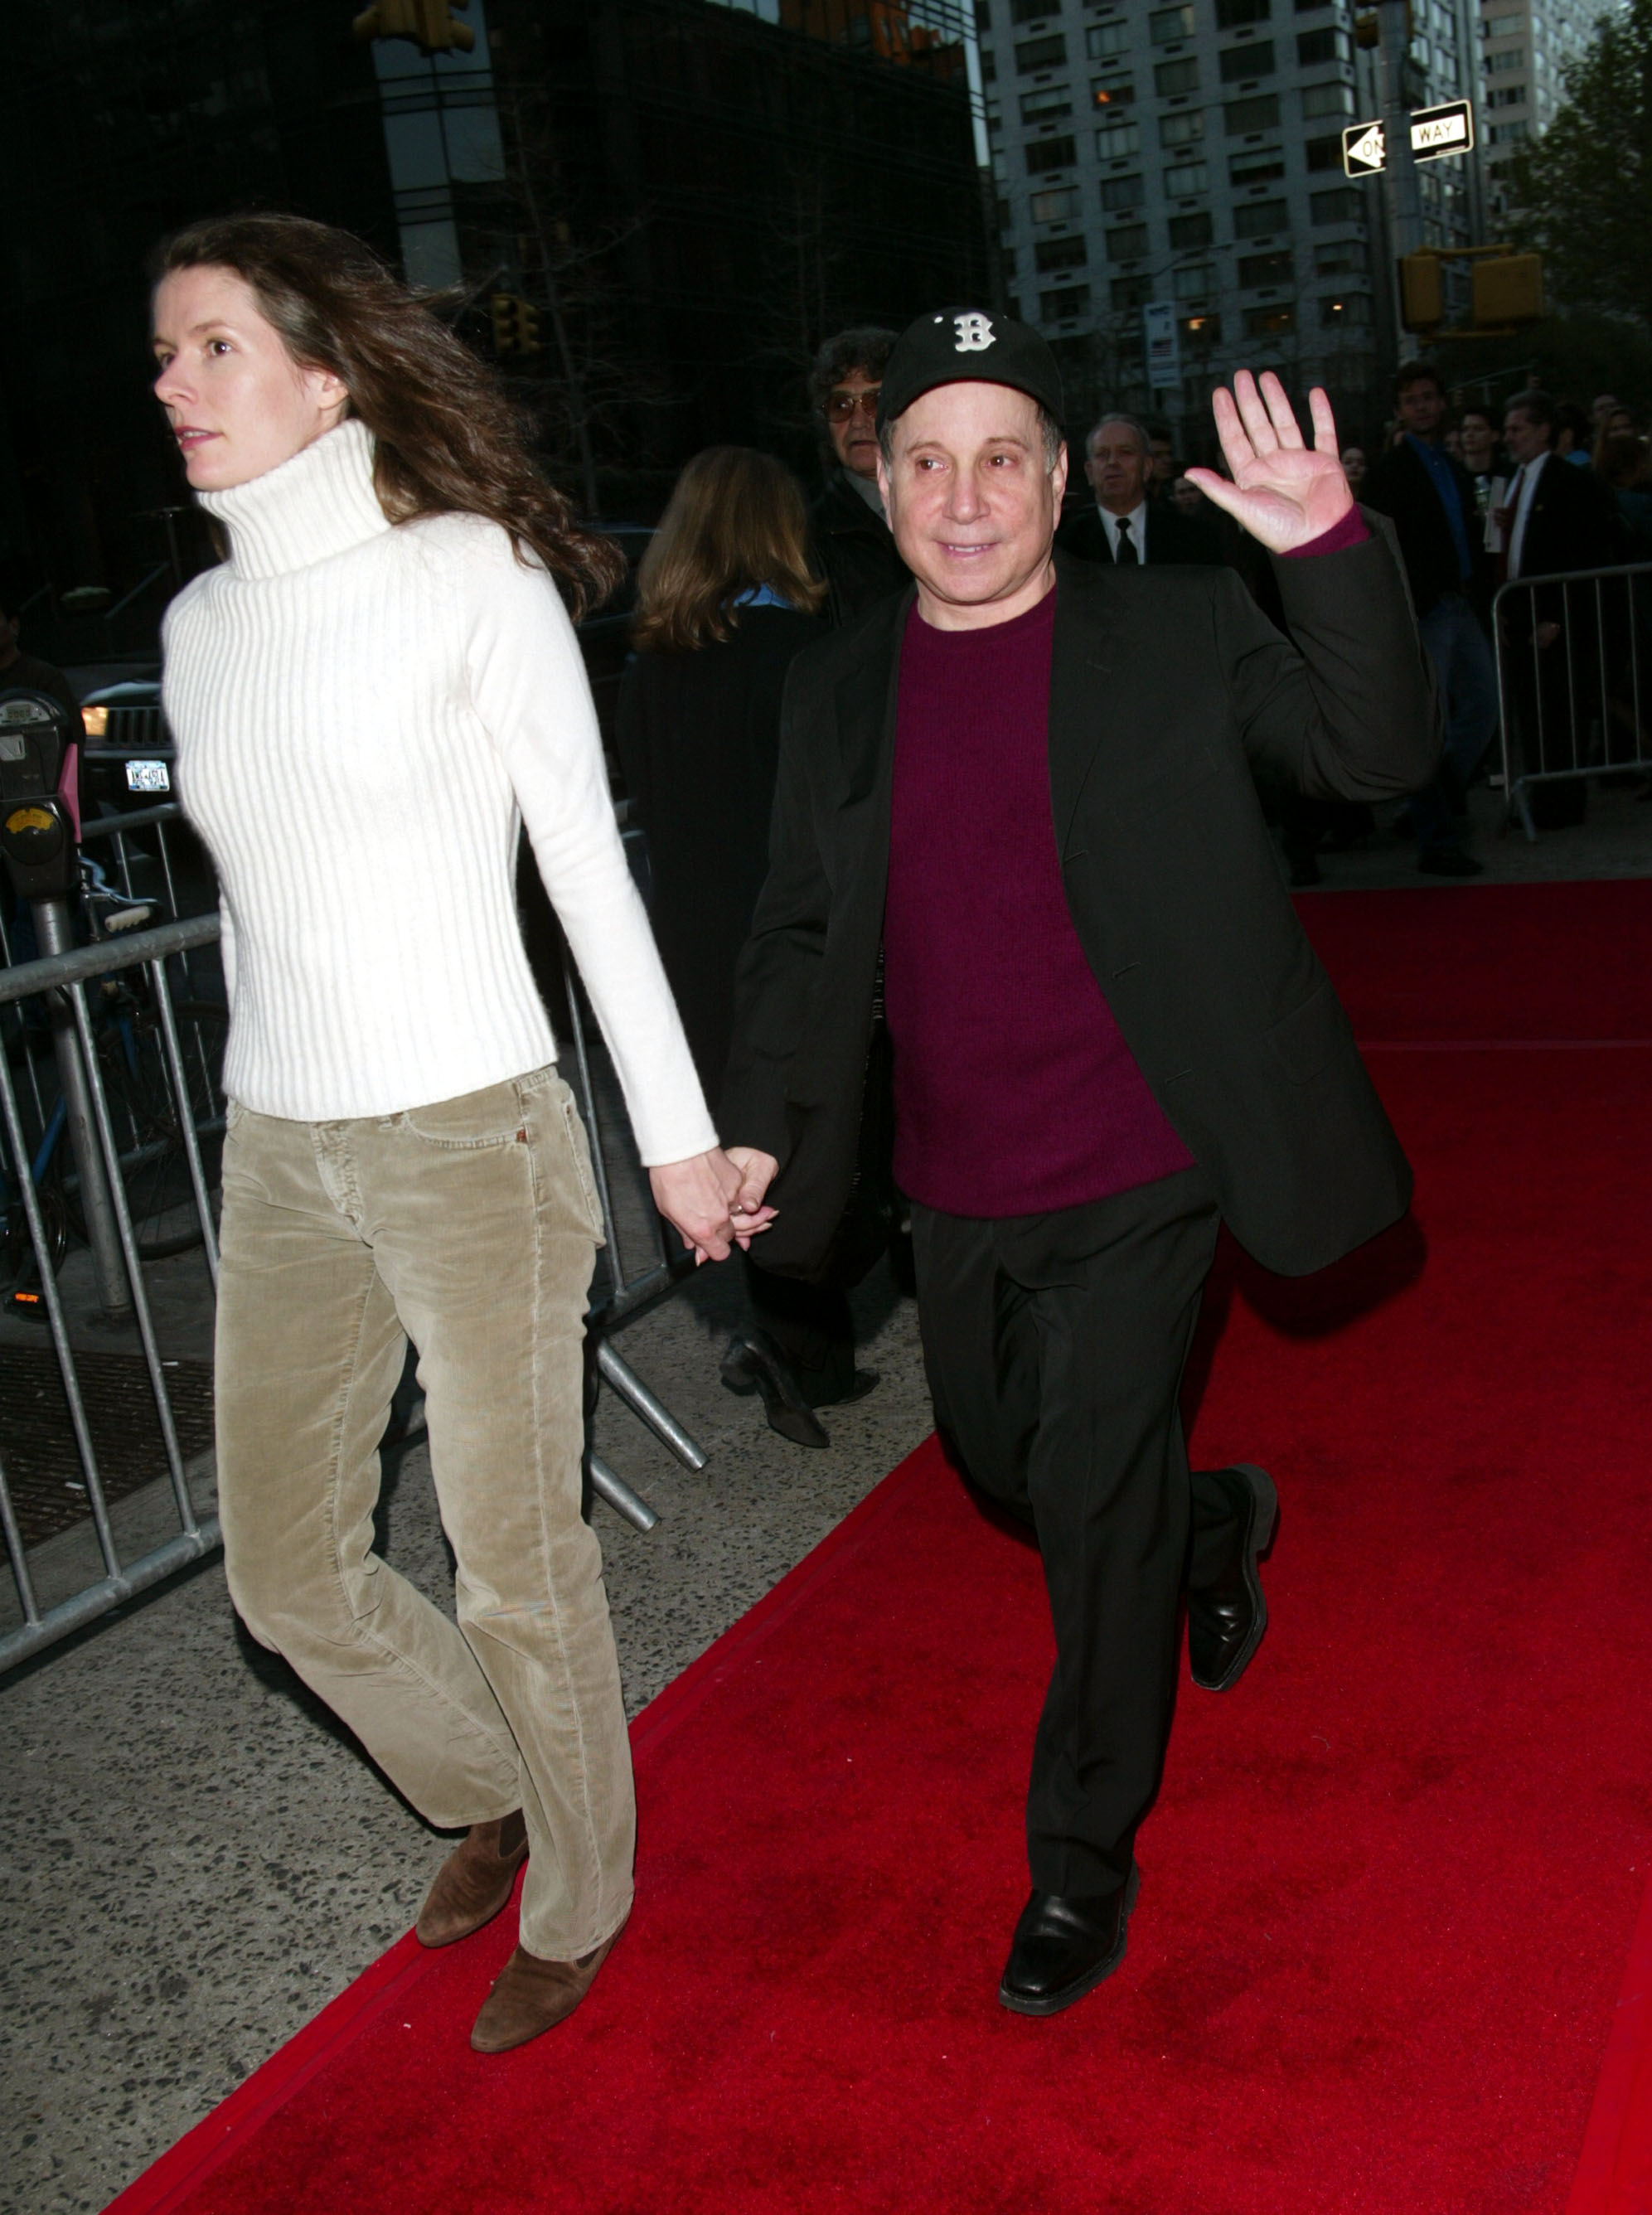 Paul Simon and Edie Brickell arriving at the New York Benefit Premiere of 